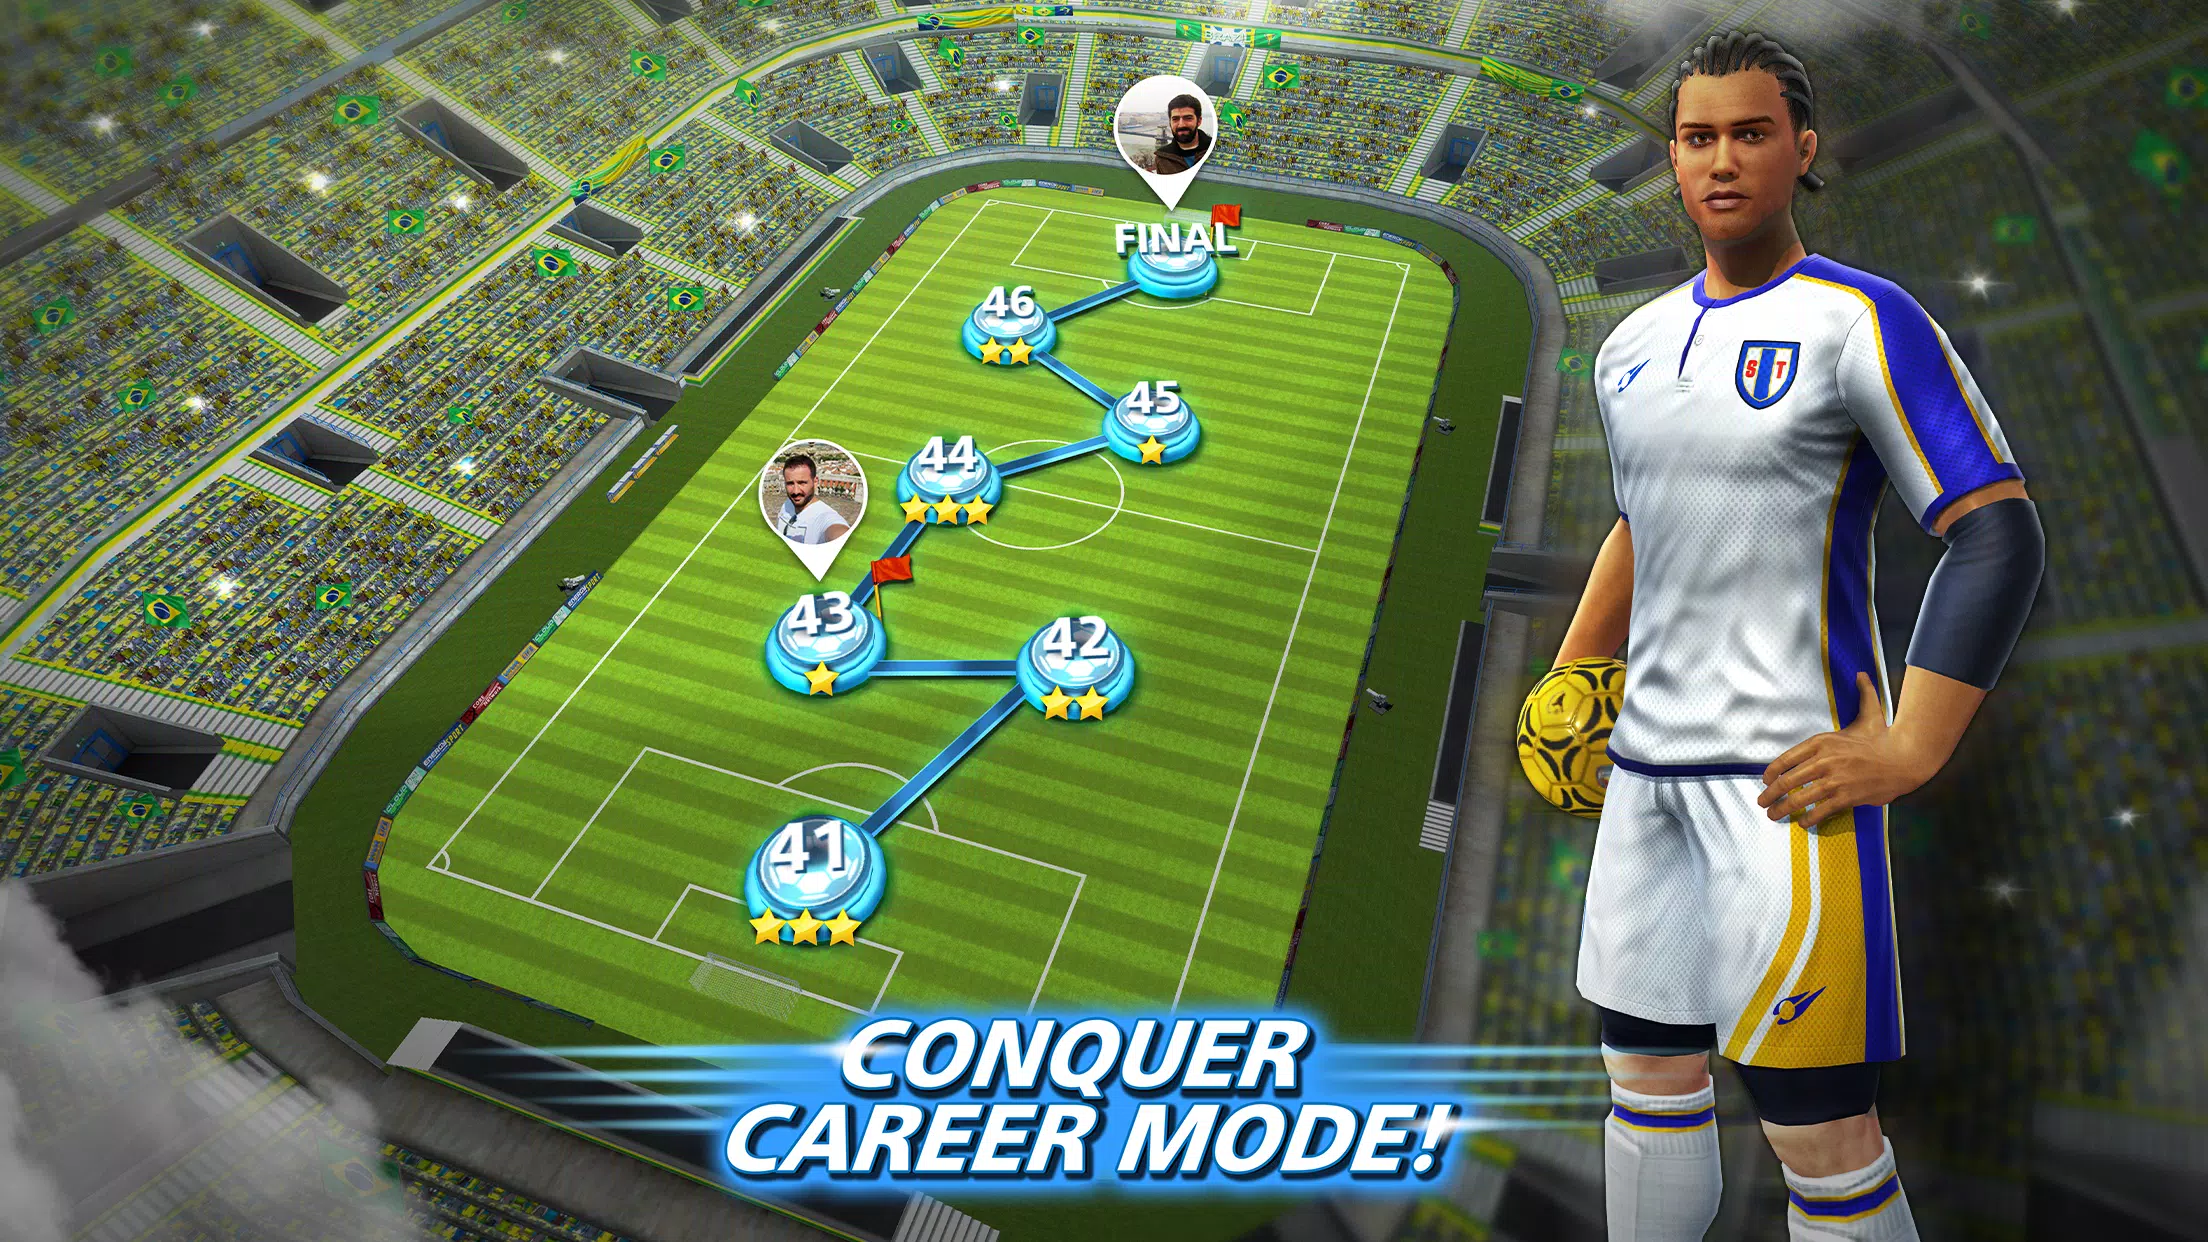 Football Strike - Multiplayer Soccer APK for Android - Download